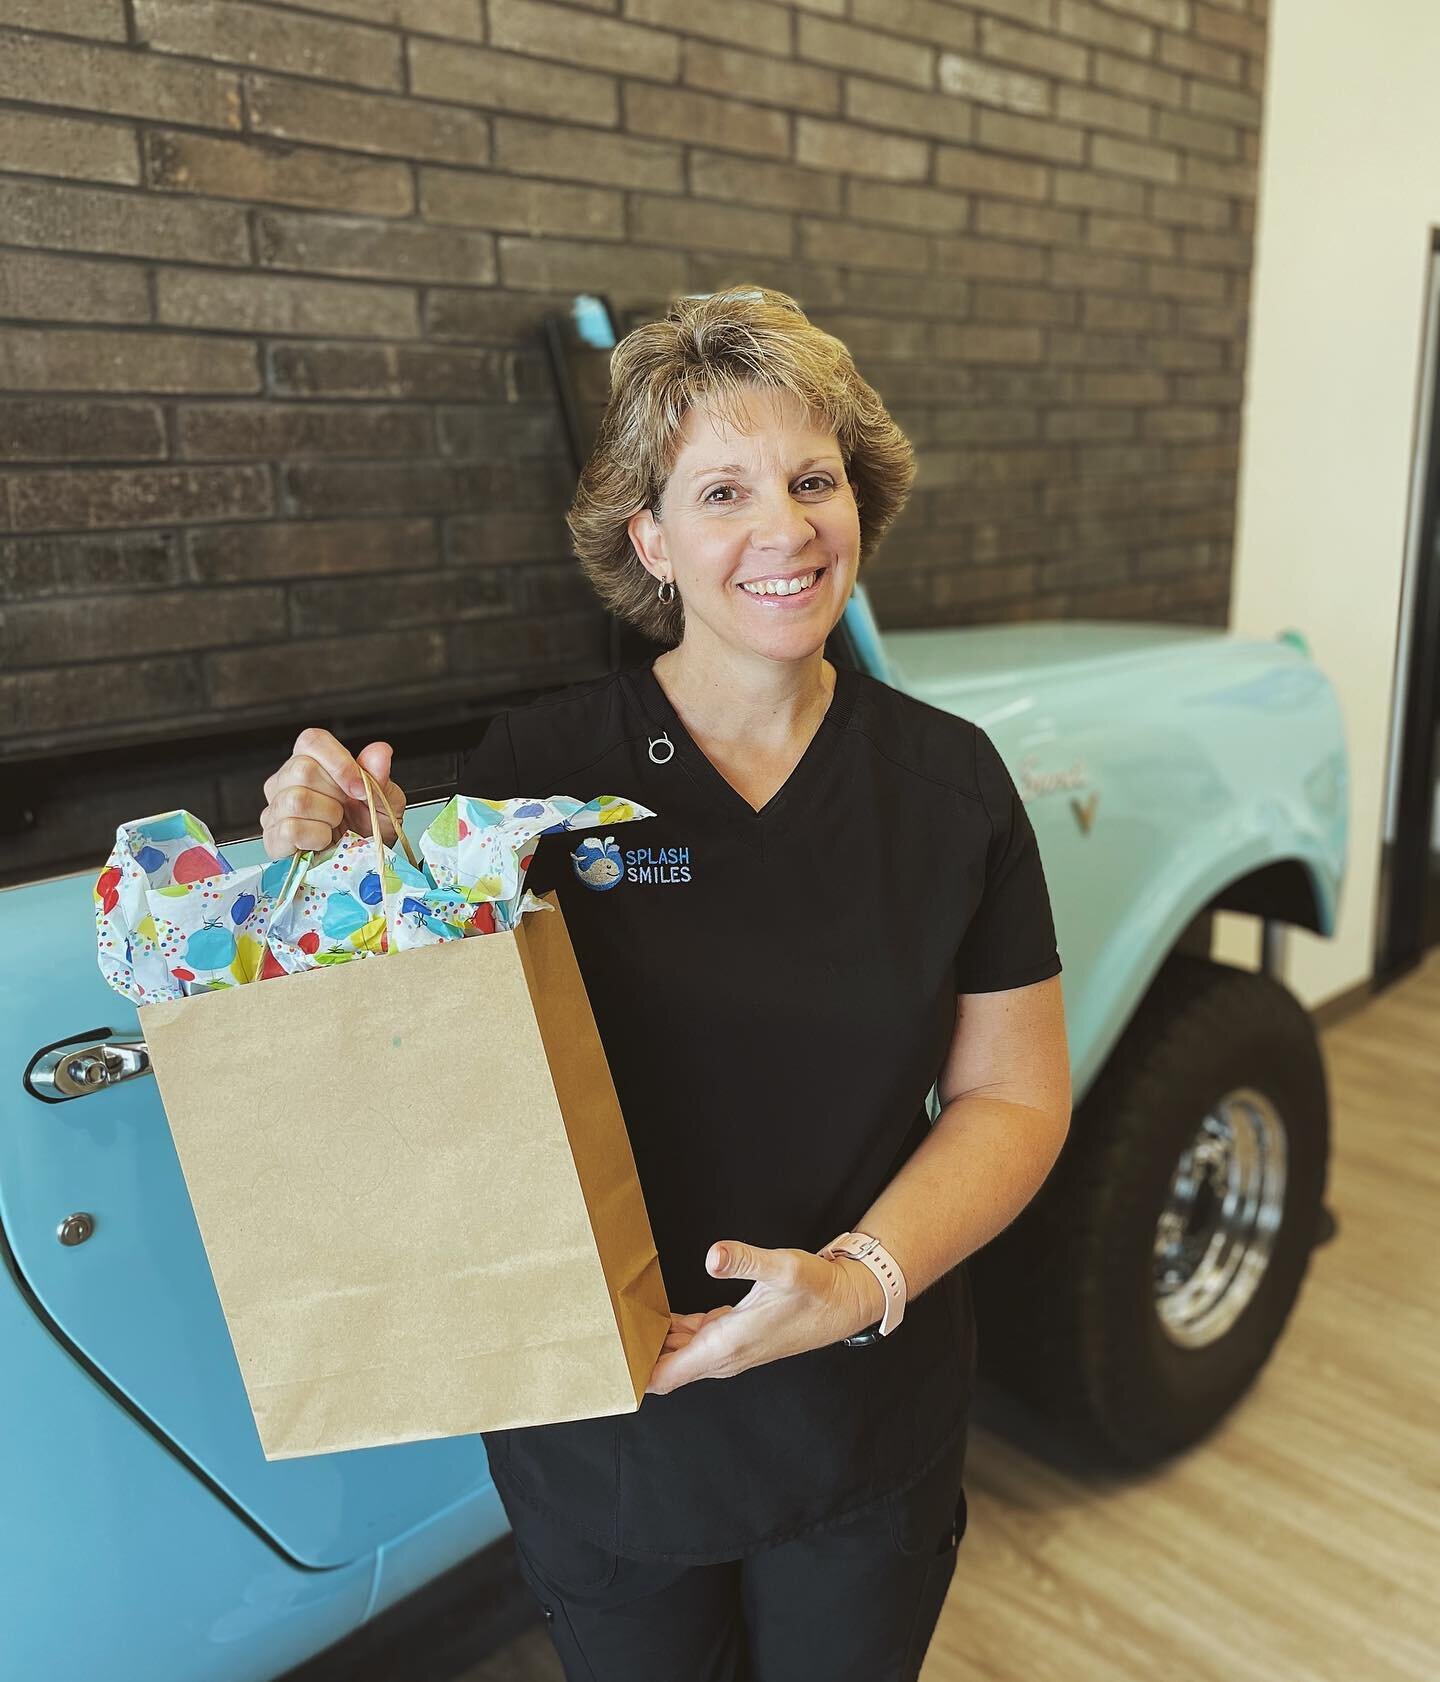 Happy birthday to our wonderful hospital coordinator &amp; dental assistant Lori! Lori brightens our day everyday &amp; is amazing with patients! We hope you have the best day!! 🎂💙🐳

#splashsmiles #happybirthday #wednesdayvibes #bestdayever